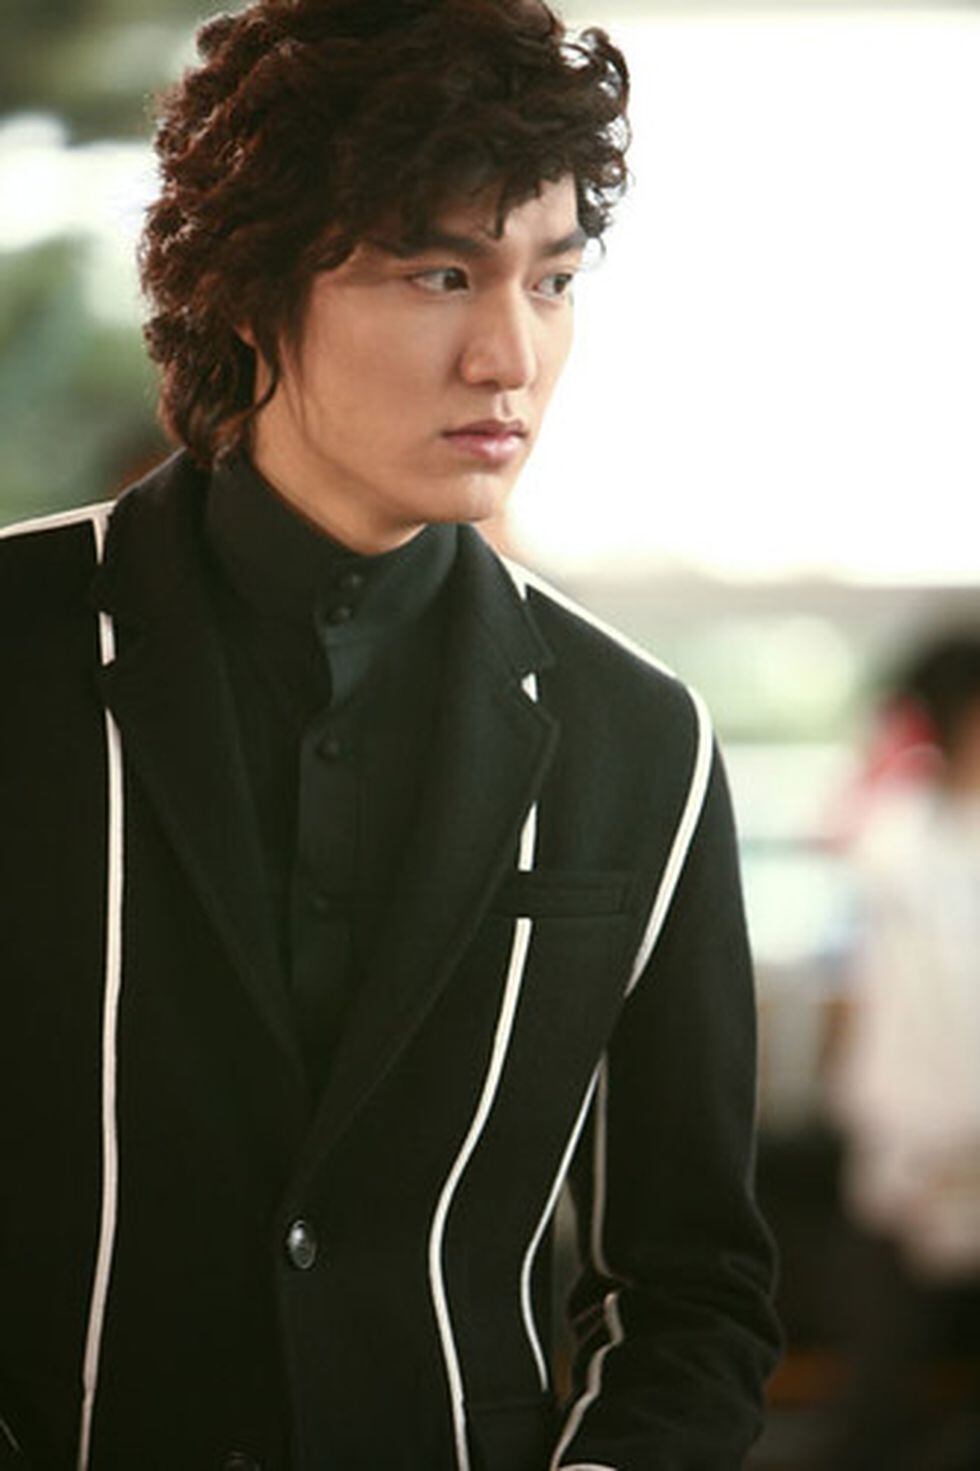 Lee Min Ho 10 Things You May About The Korean Actor Boys Over Flowers Do Not Know Gu Jun Pyo The Boys Are Better Than The Famous Flowers